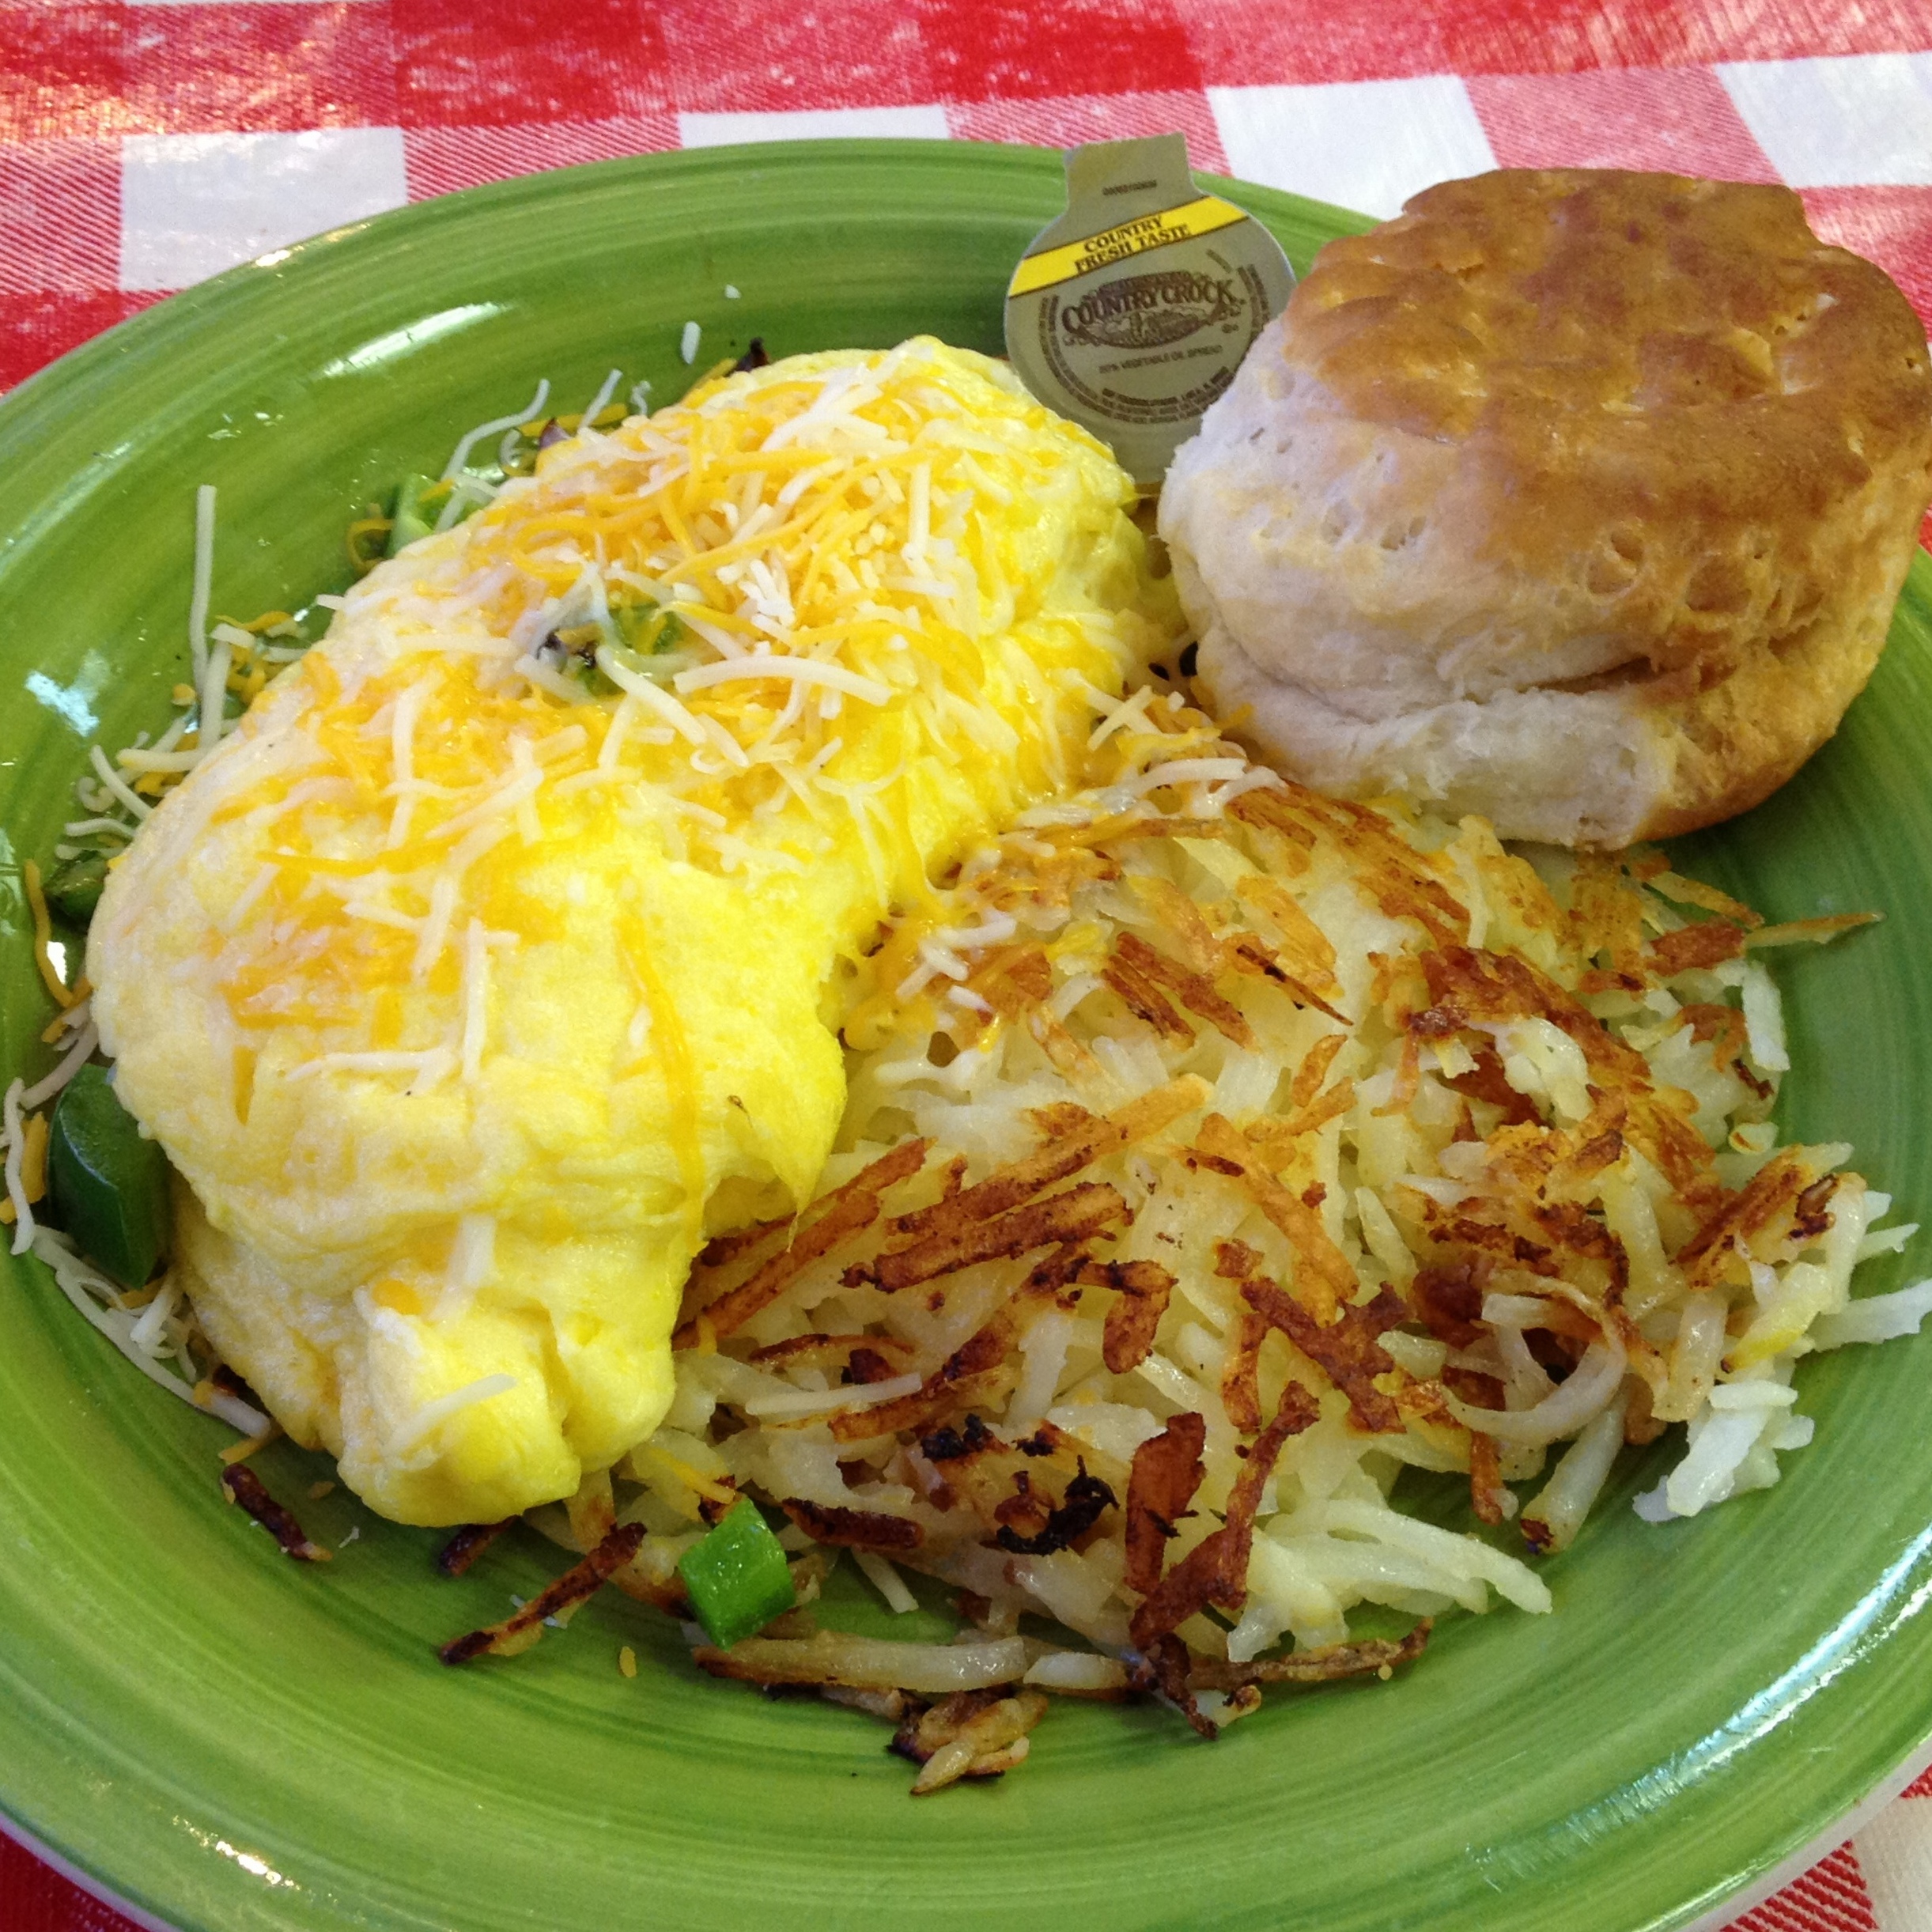 Omelet at Frontier Diner